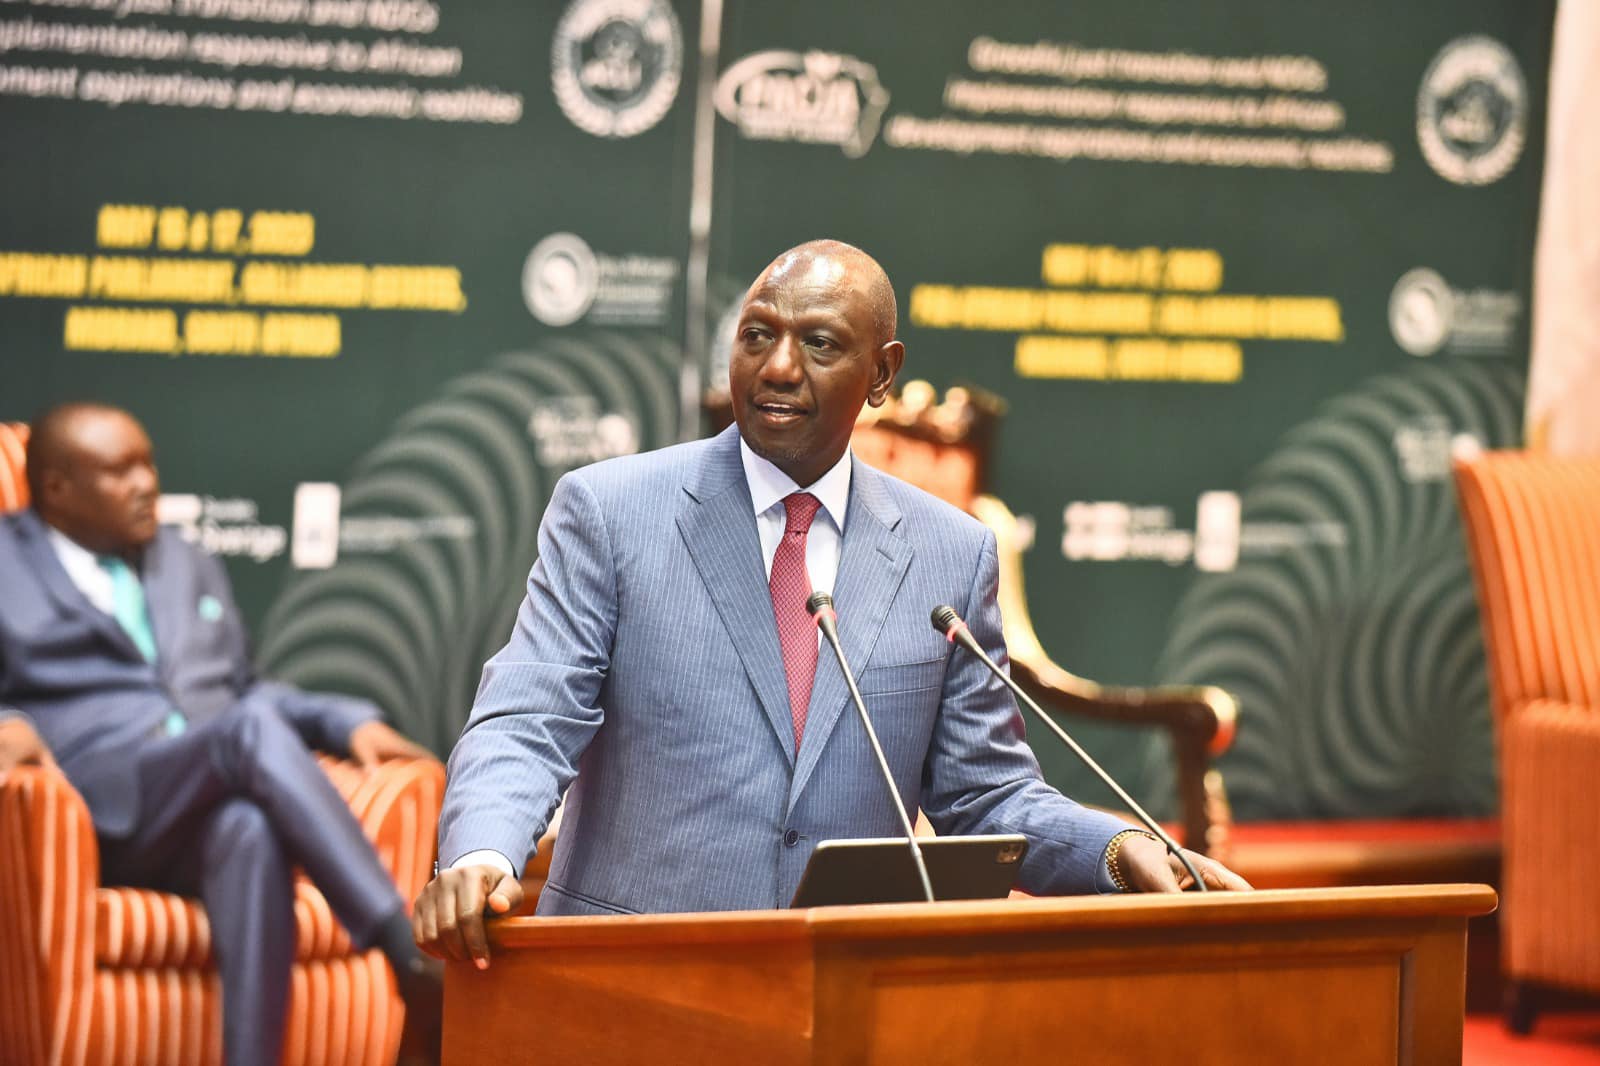 Addressing climate change critical for Africa’s development: President Ruto